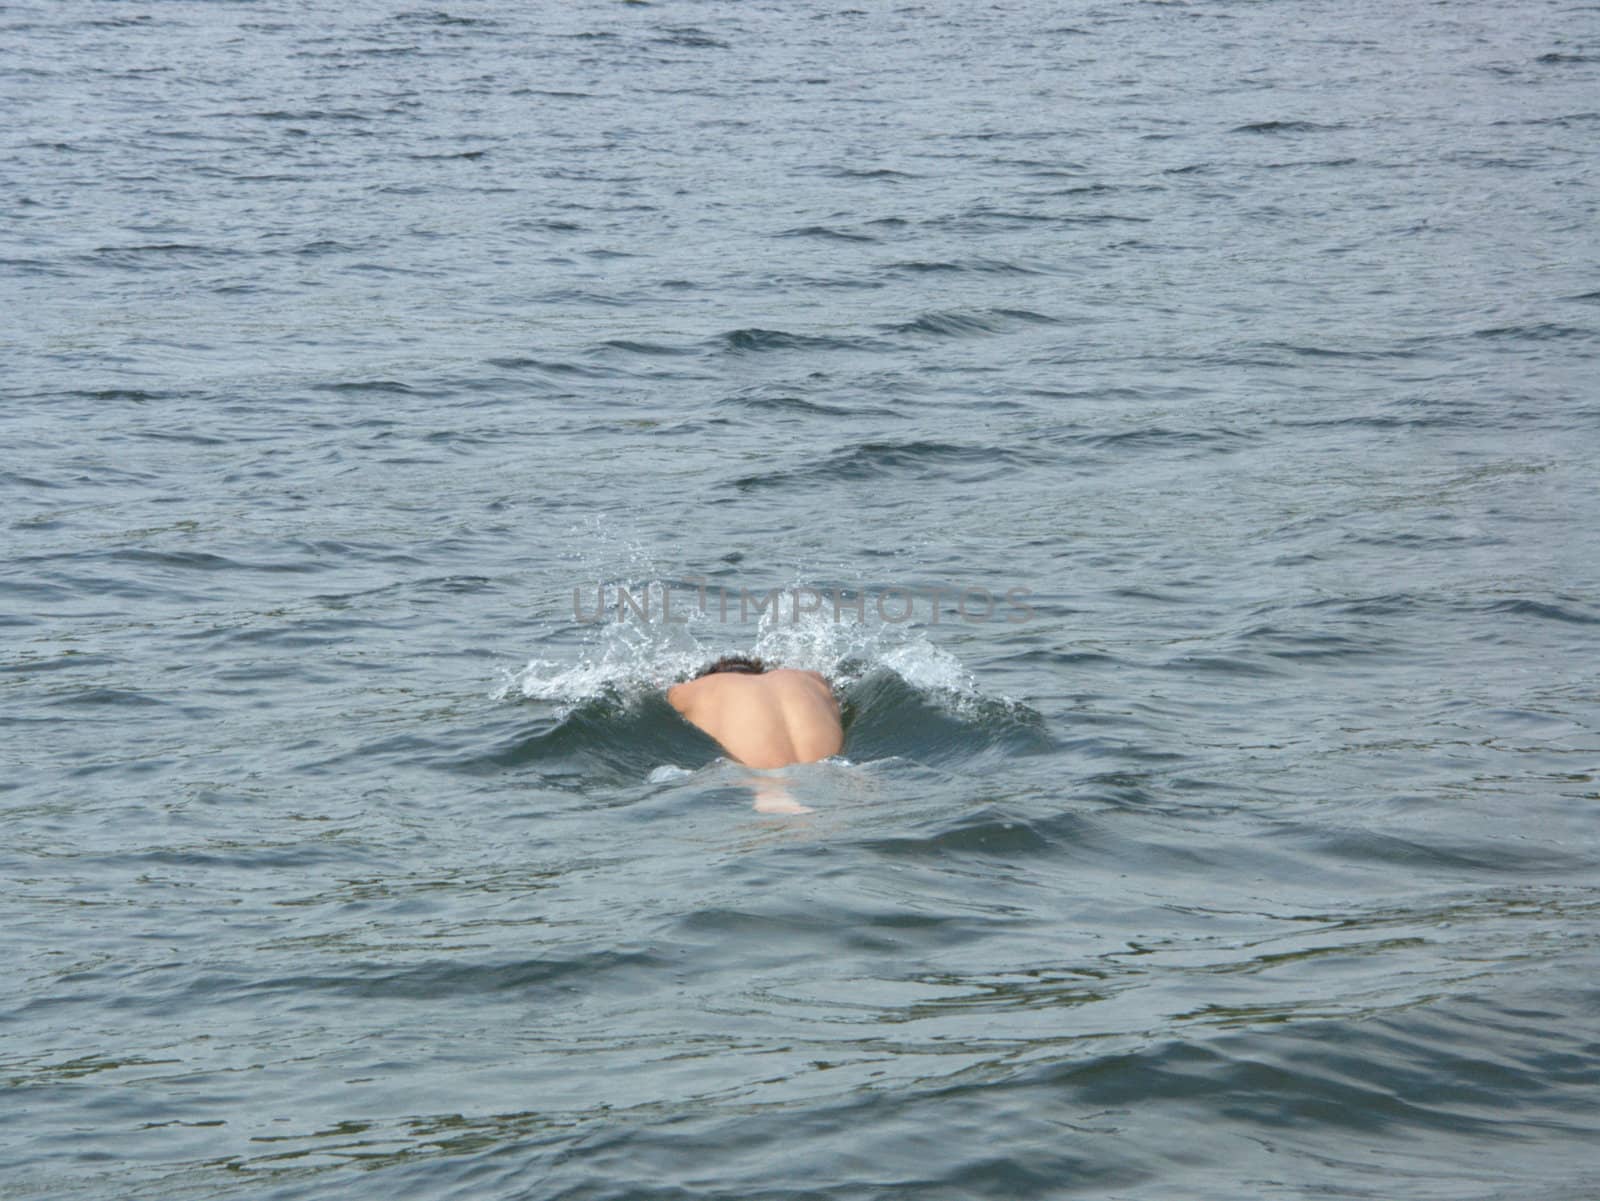 The image of a back of the swimmer in lake